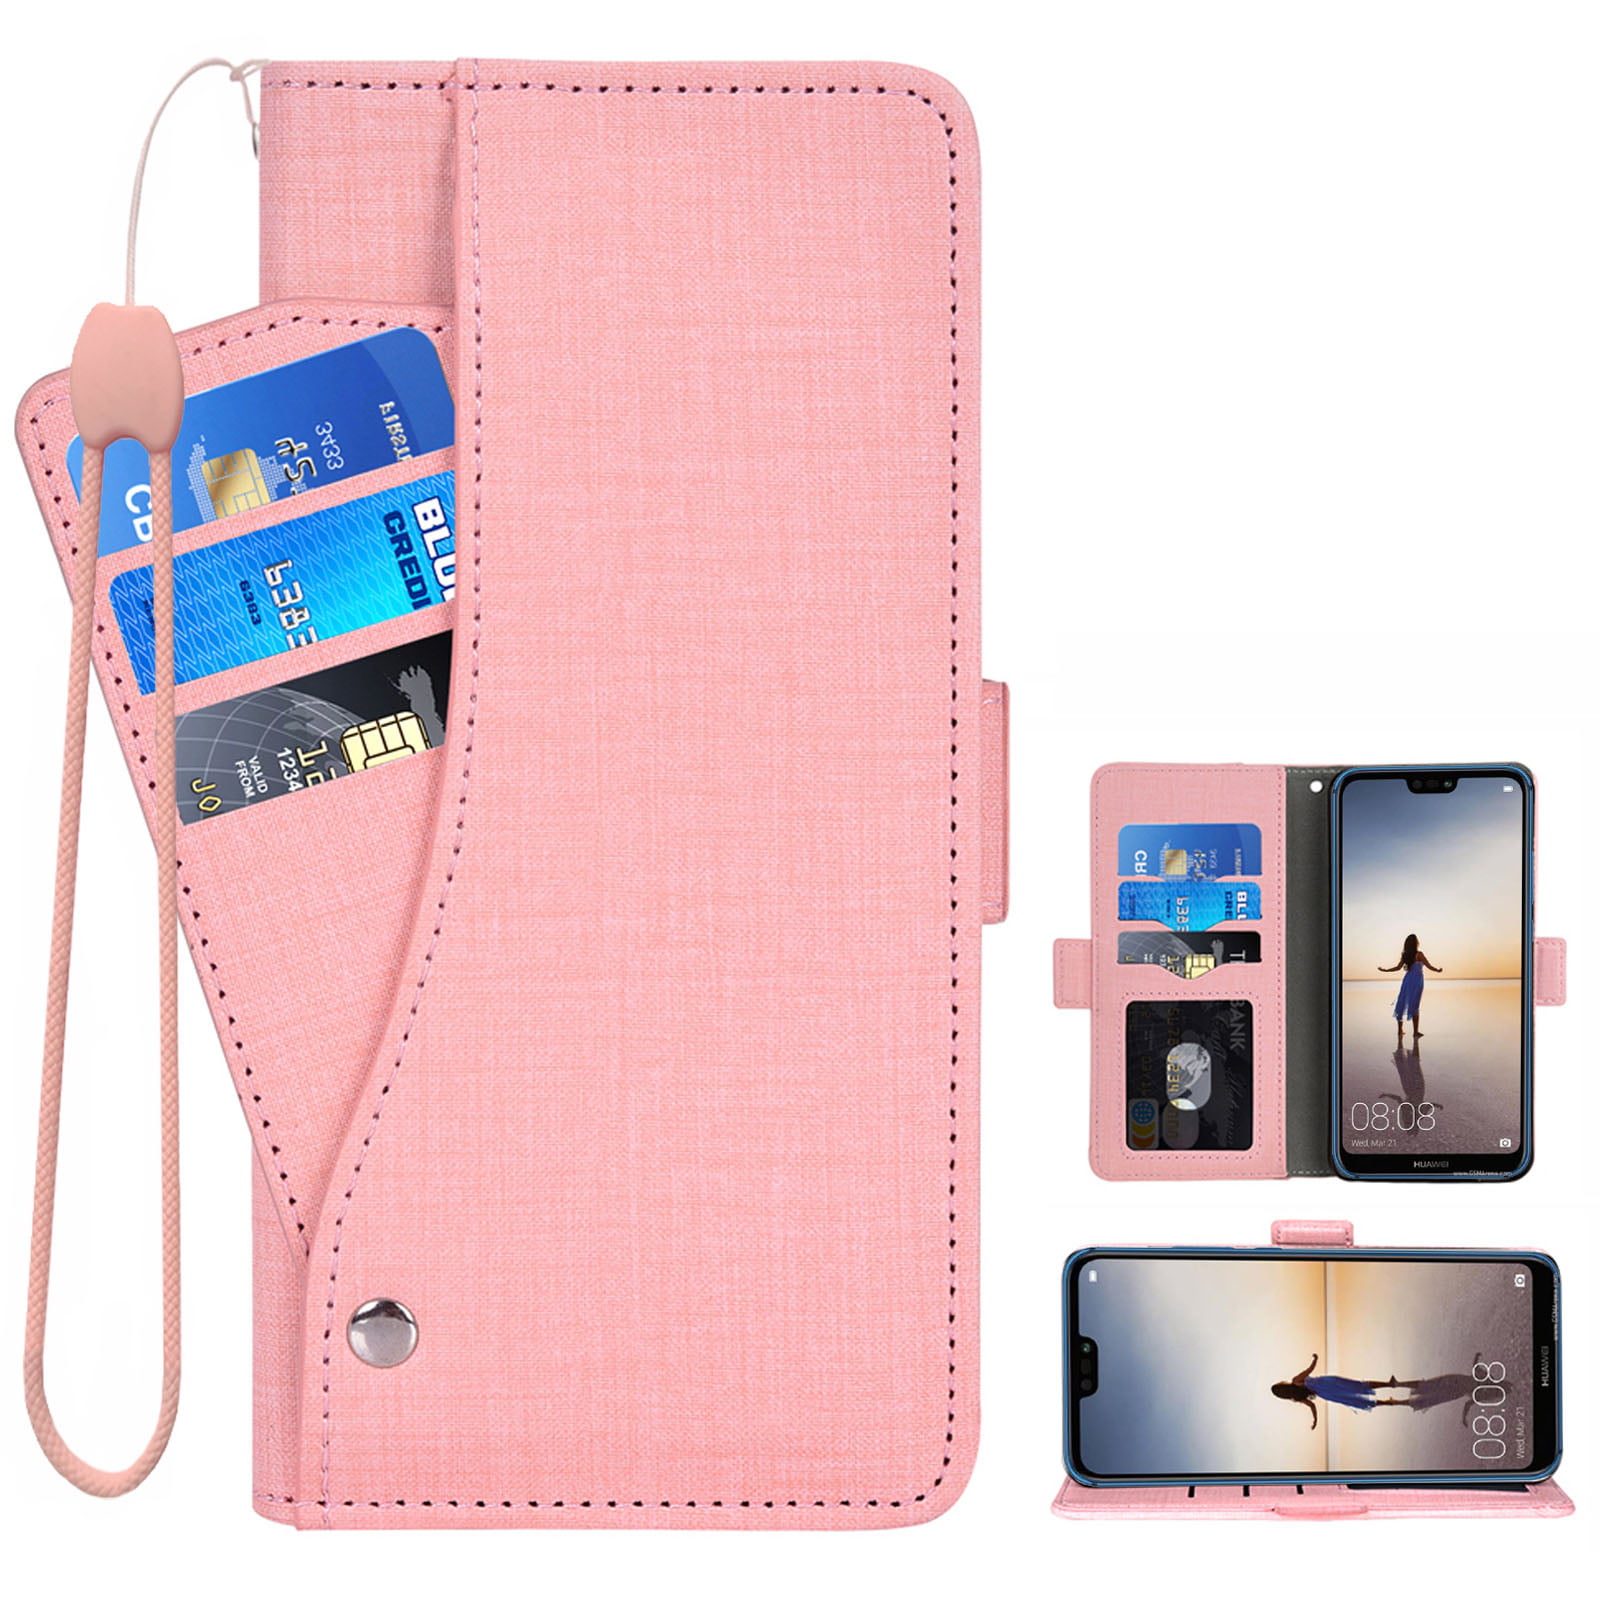 Simple-Style Leather Case for Huawei P20 Flip Cover fit for Huawei P20 Business Gifts 